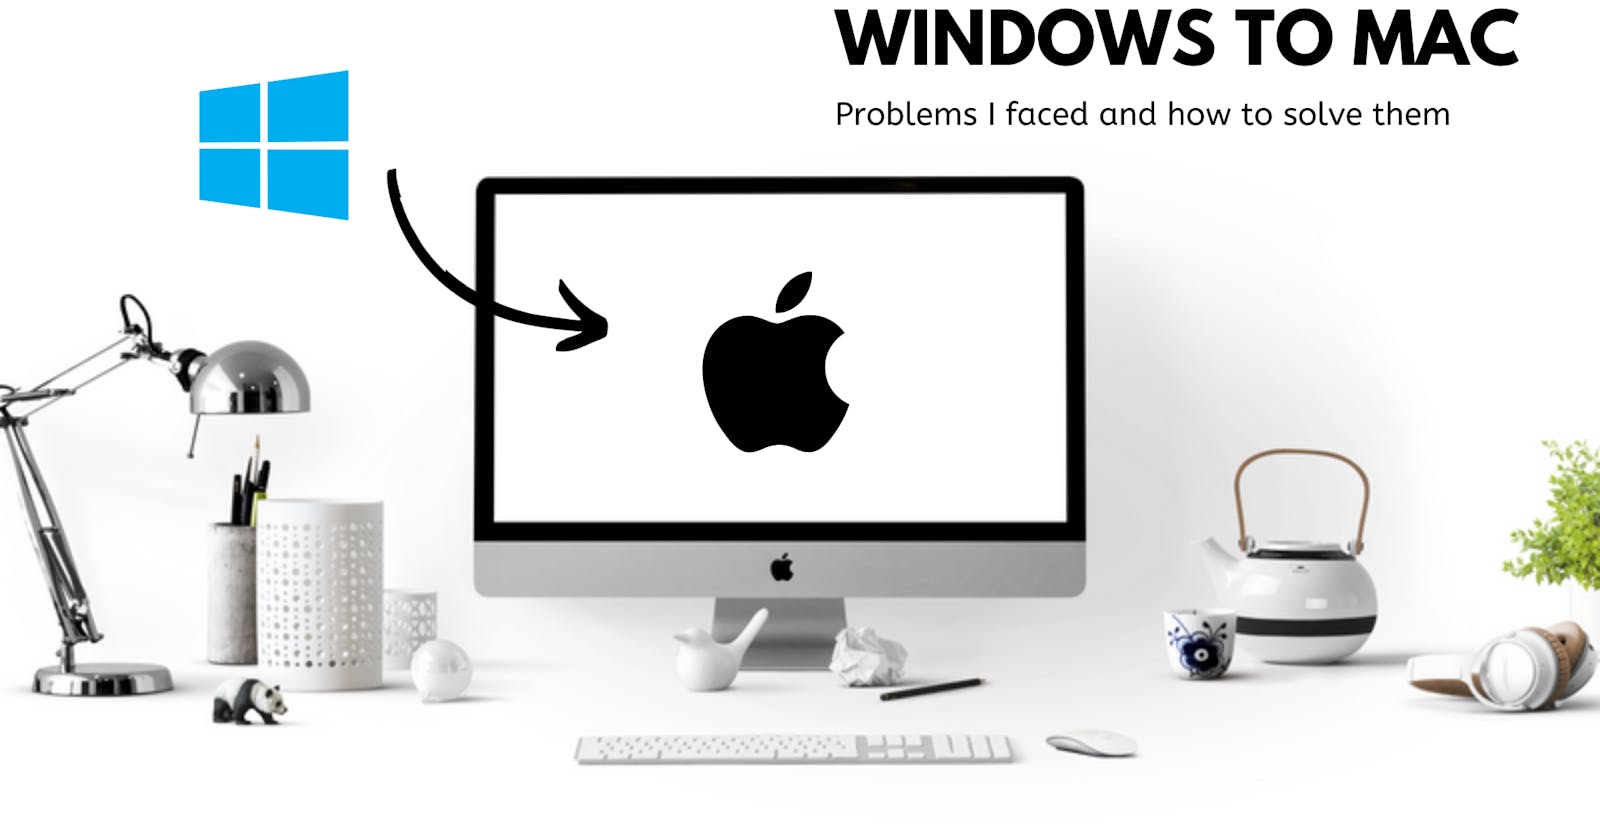 Problems I faced in a Mac as a Windows user (and how to solve them)